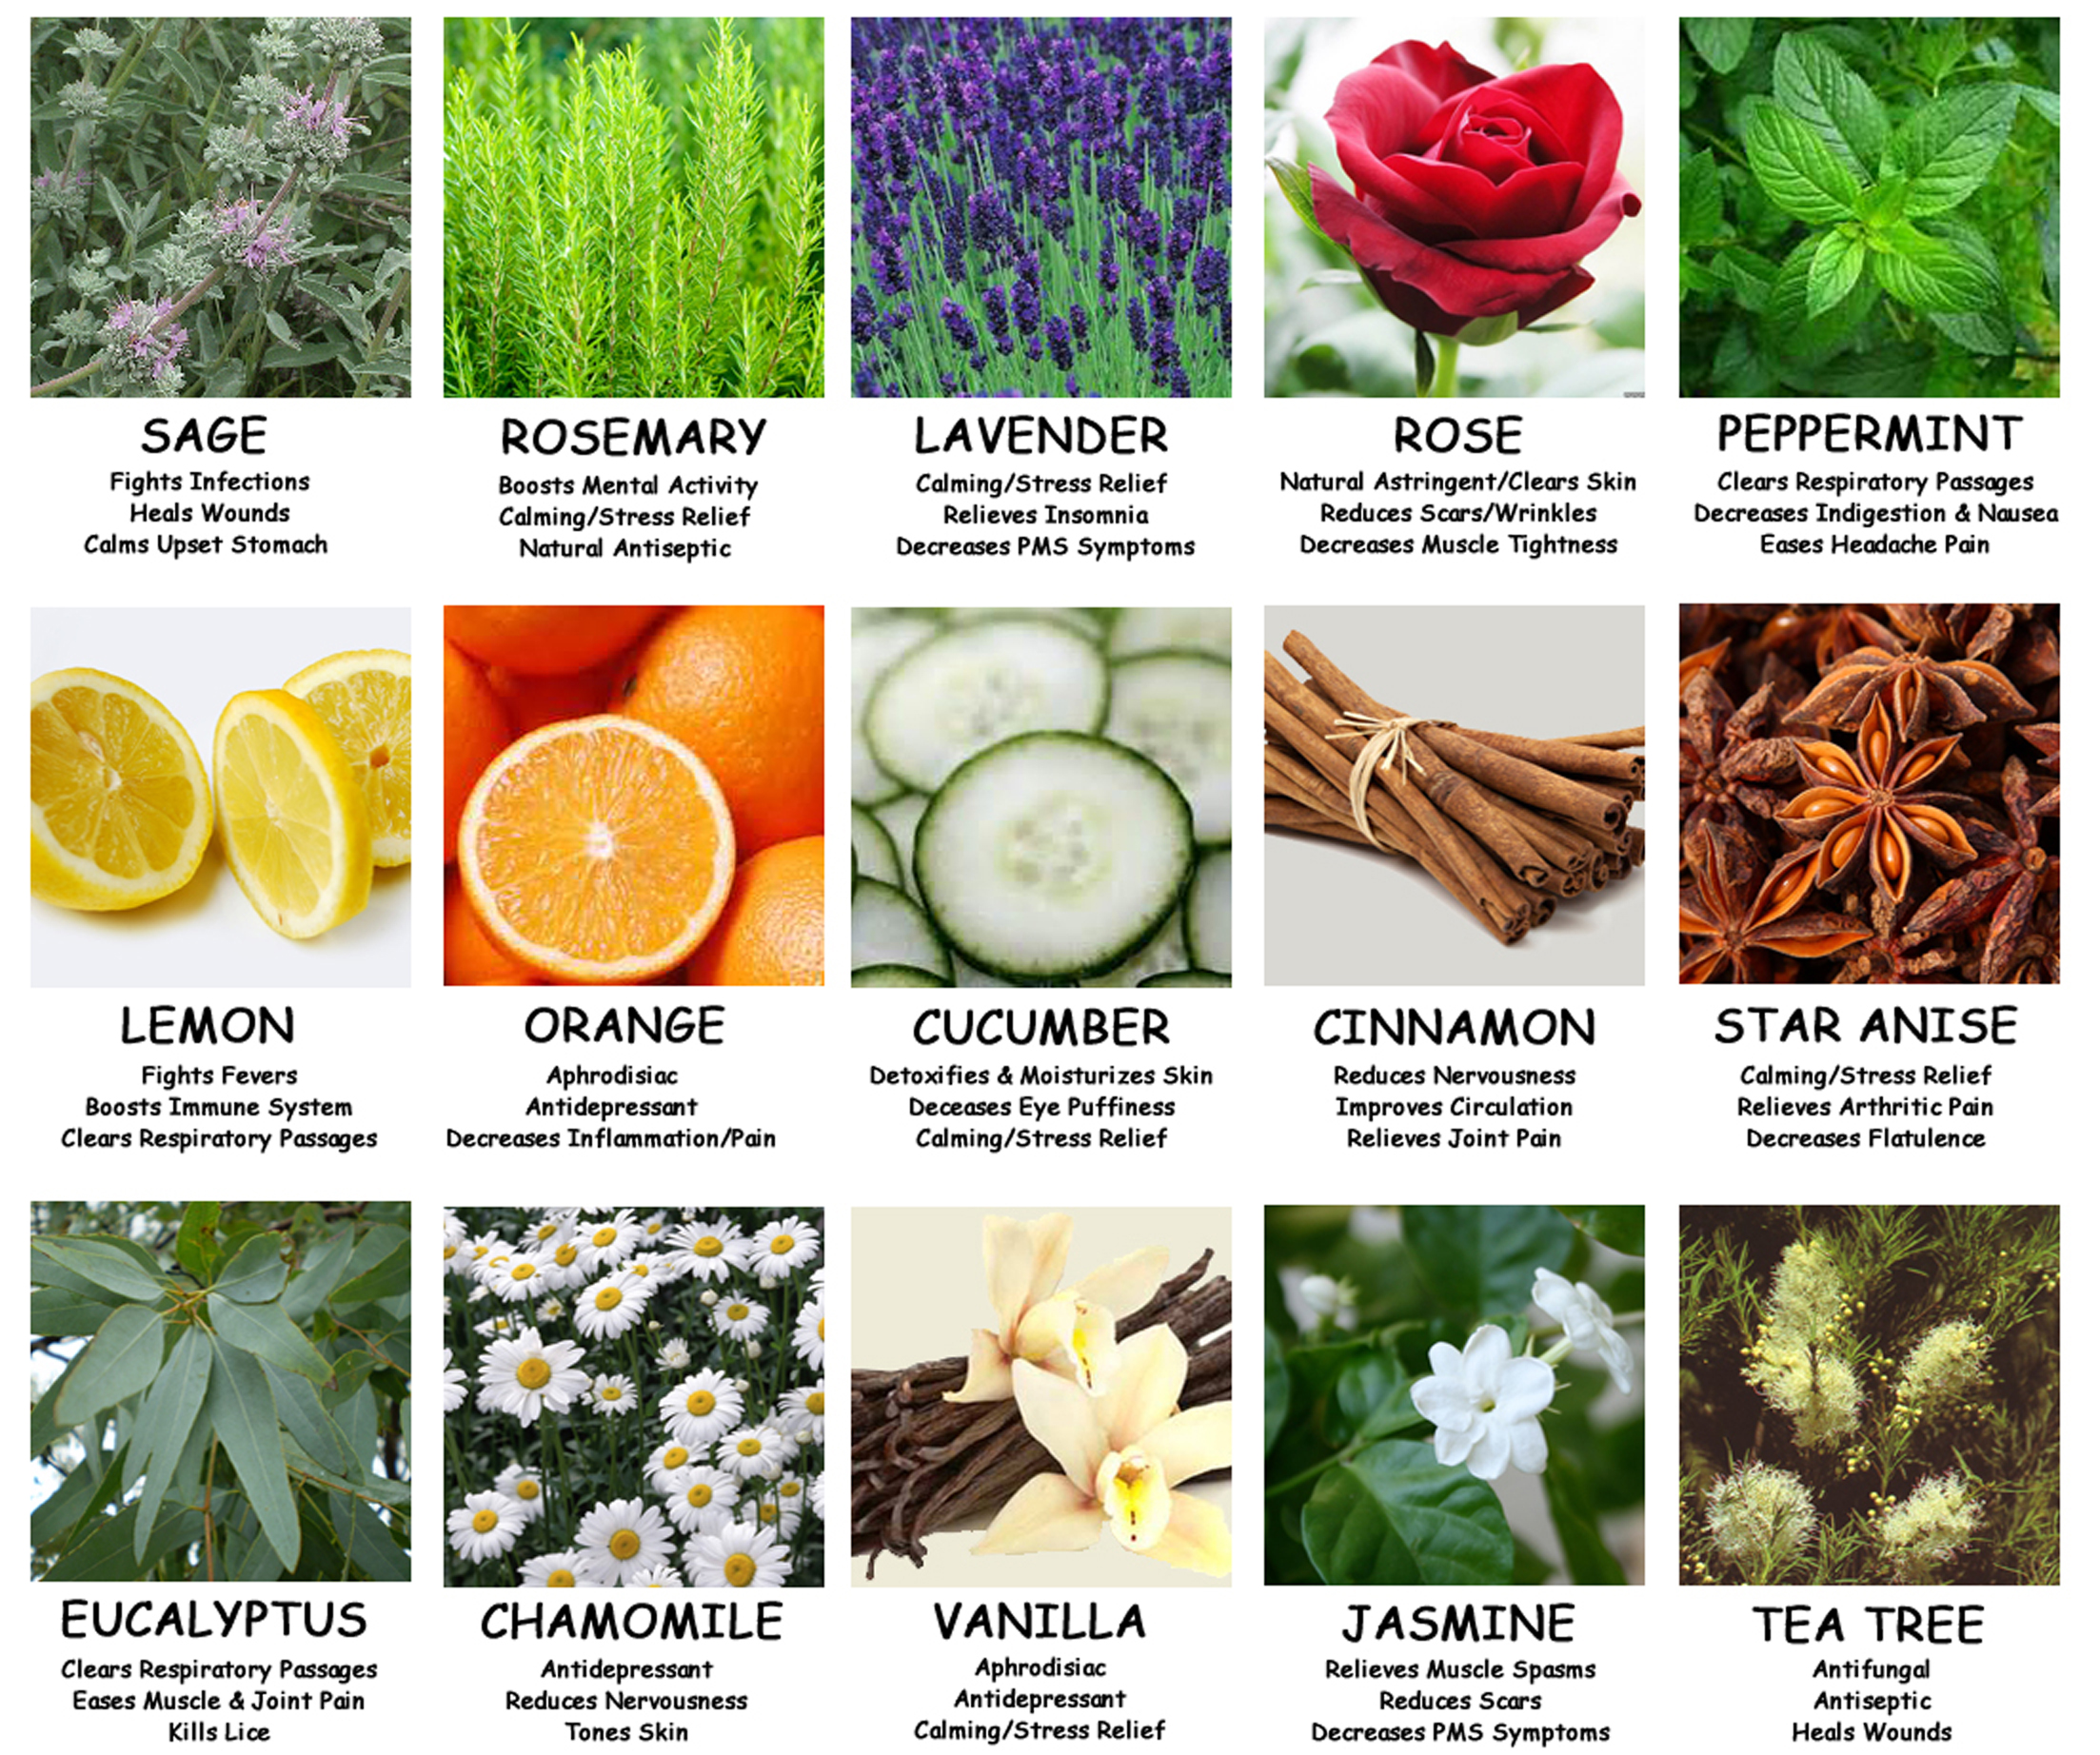 Aromatherapy Essential Oils Chart